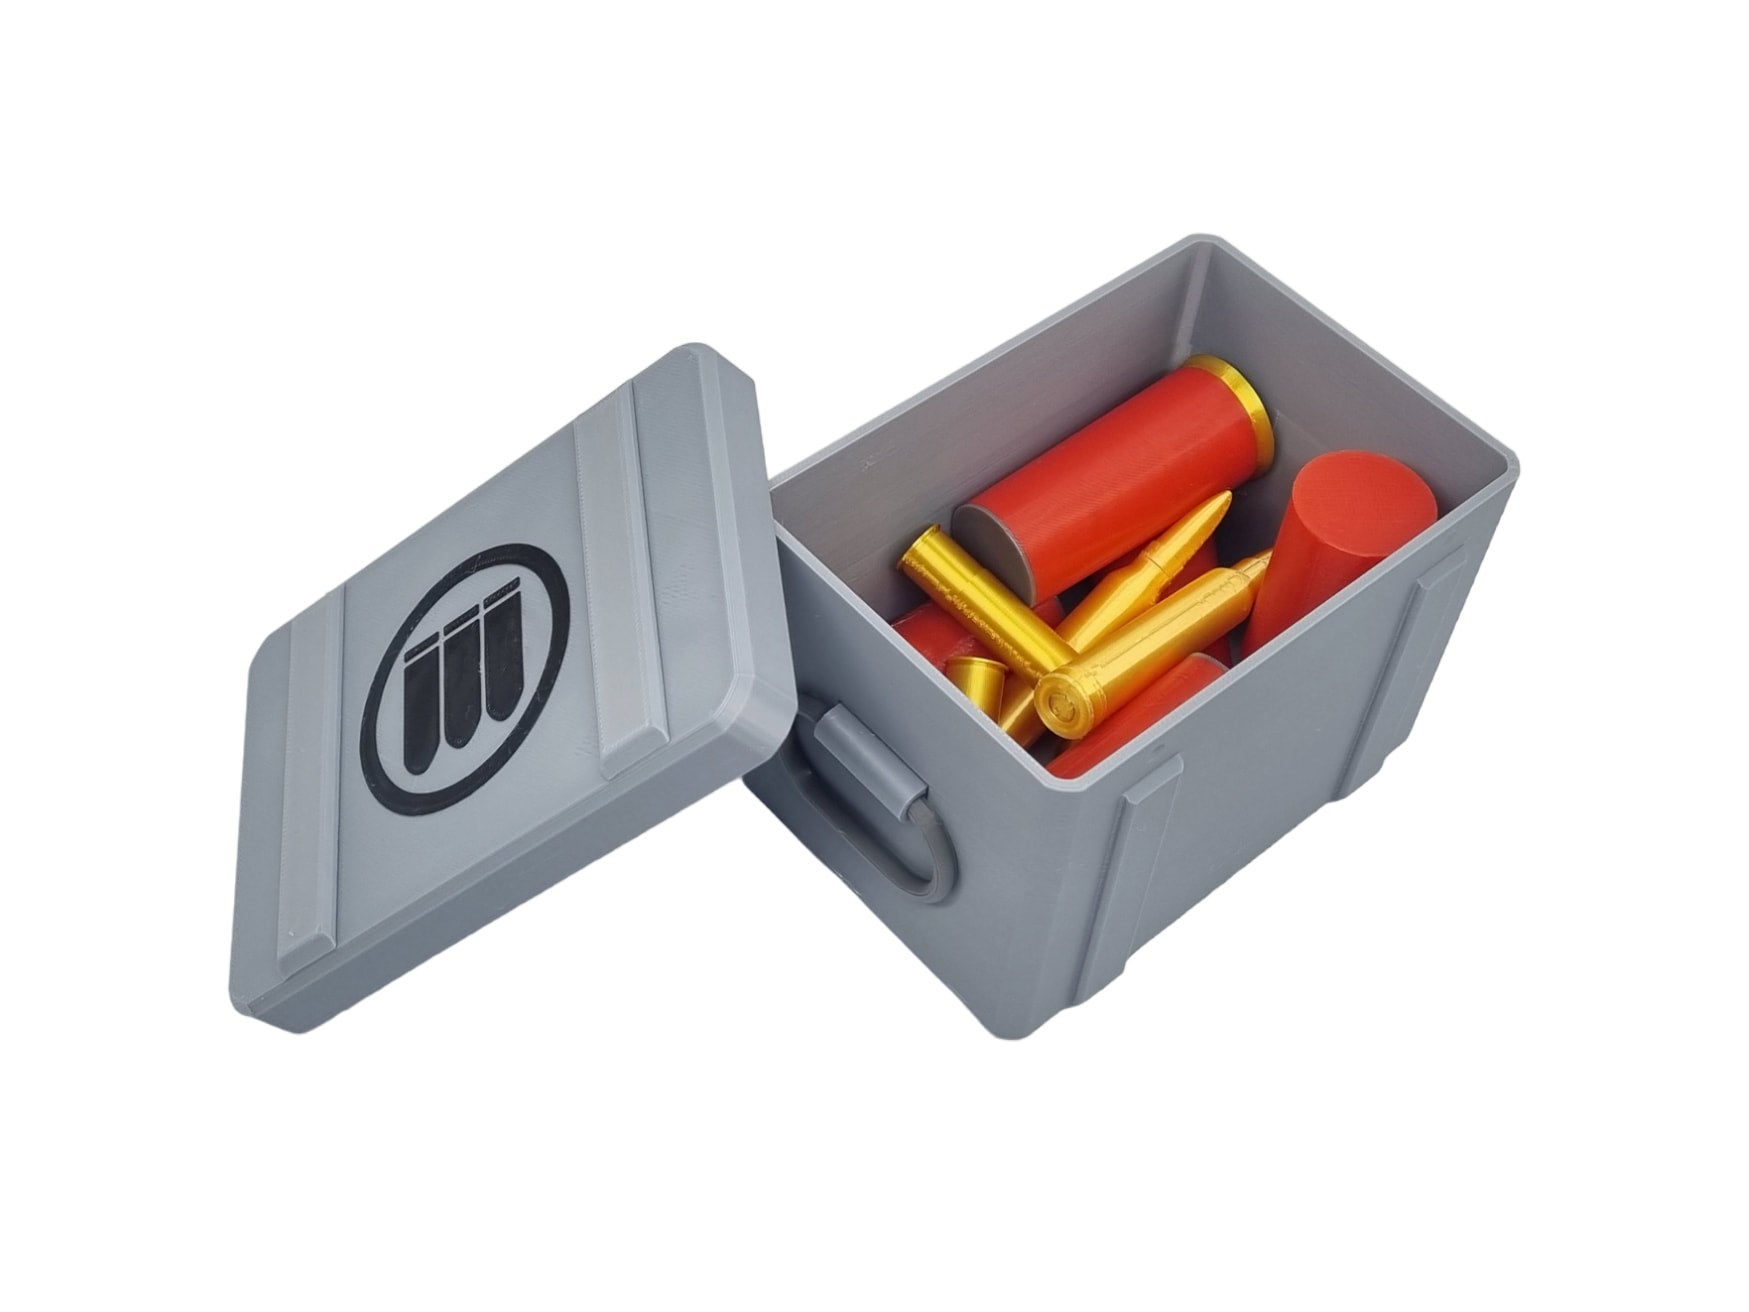 TF2 Ammo Box Storage Containers